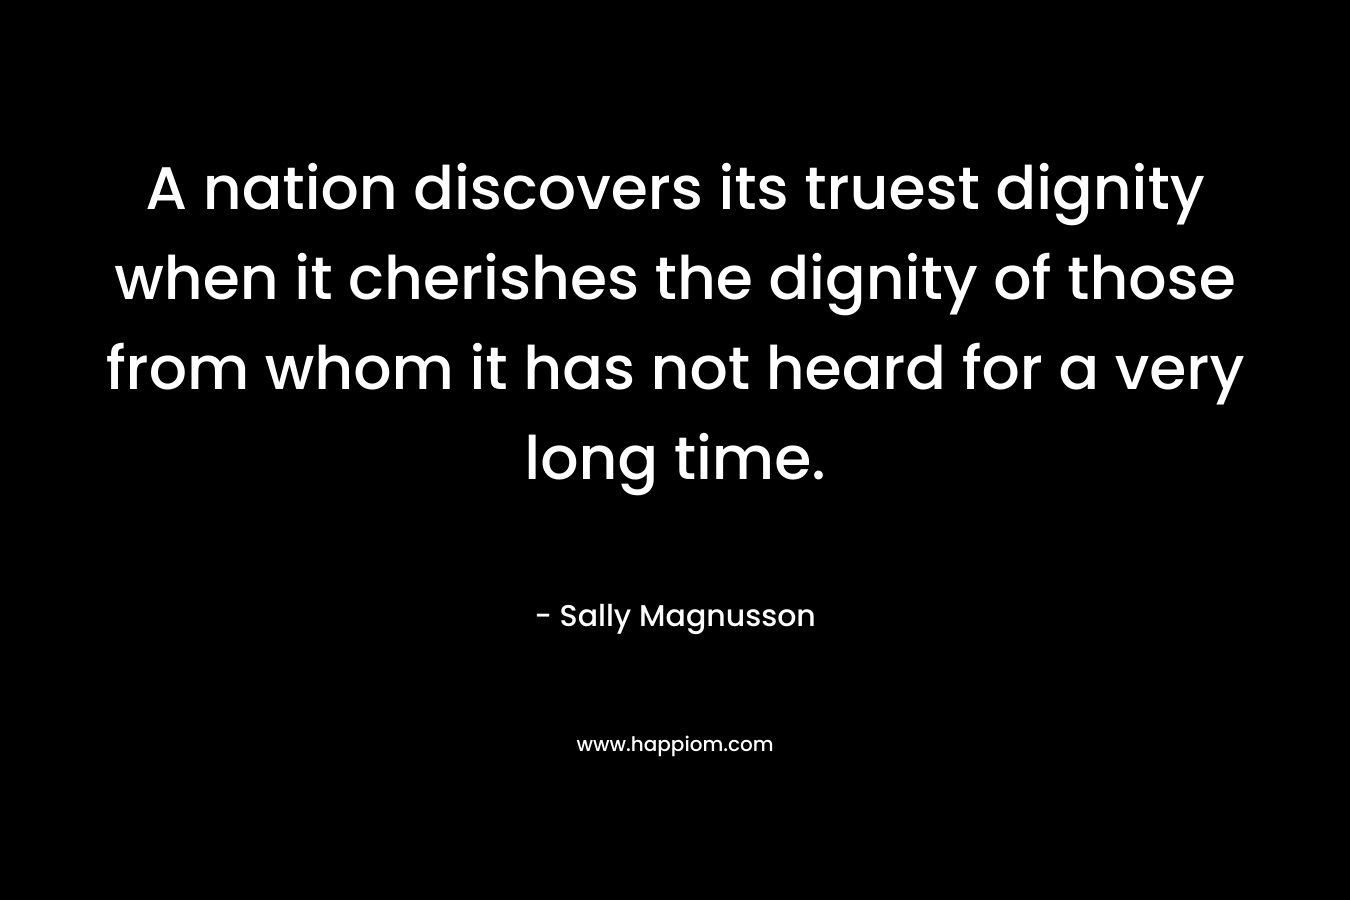 A nation discovers its truest dignity when it cherishes the dignity of those from whom it has not heard for a very long time.